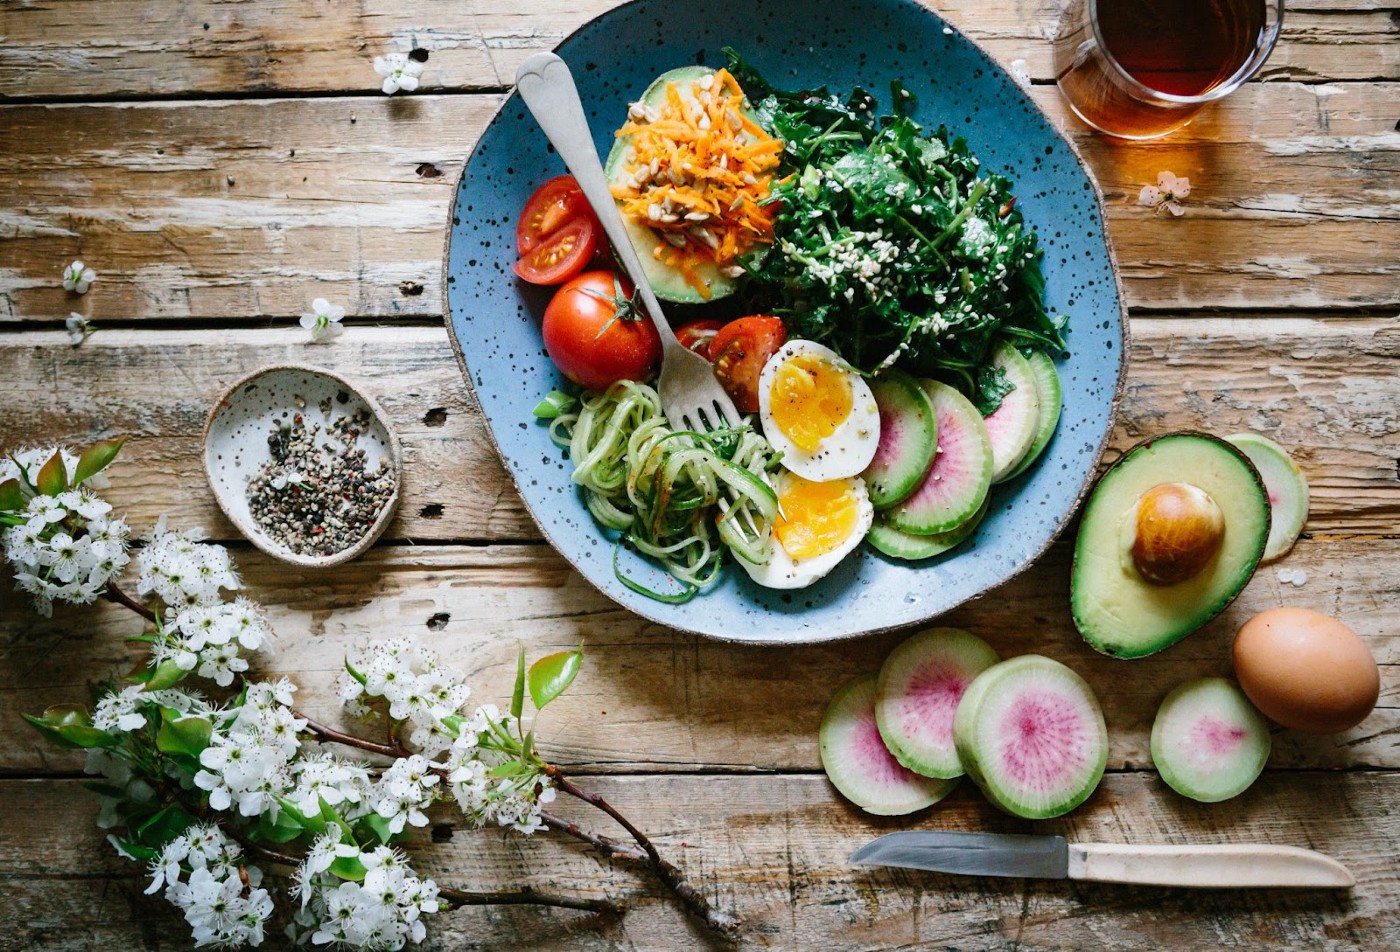 A table with a bowl of eggs and salads, tea, fruits and flowers.